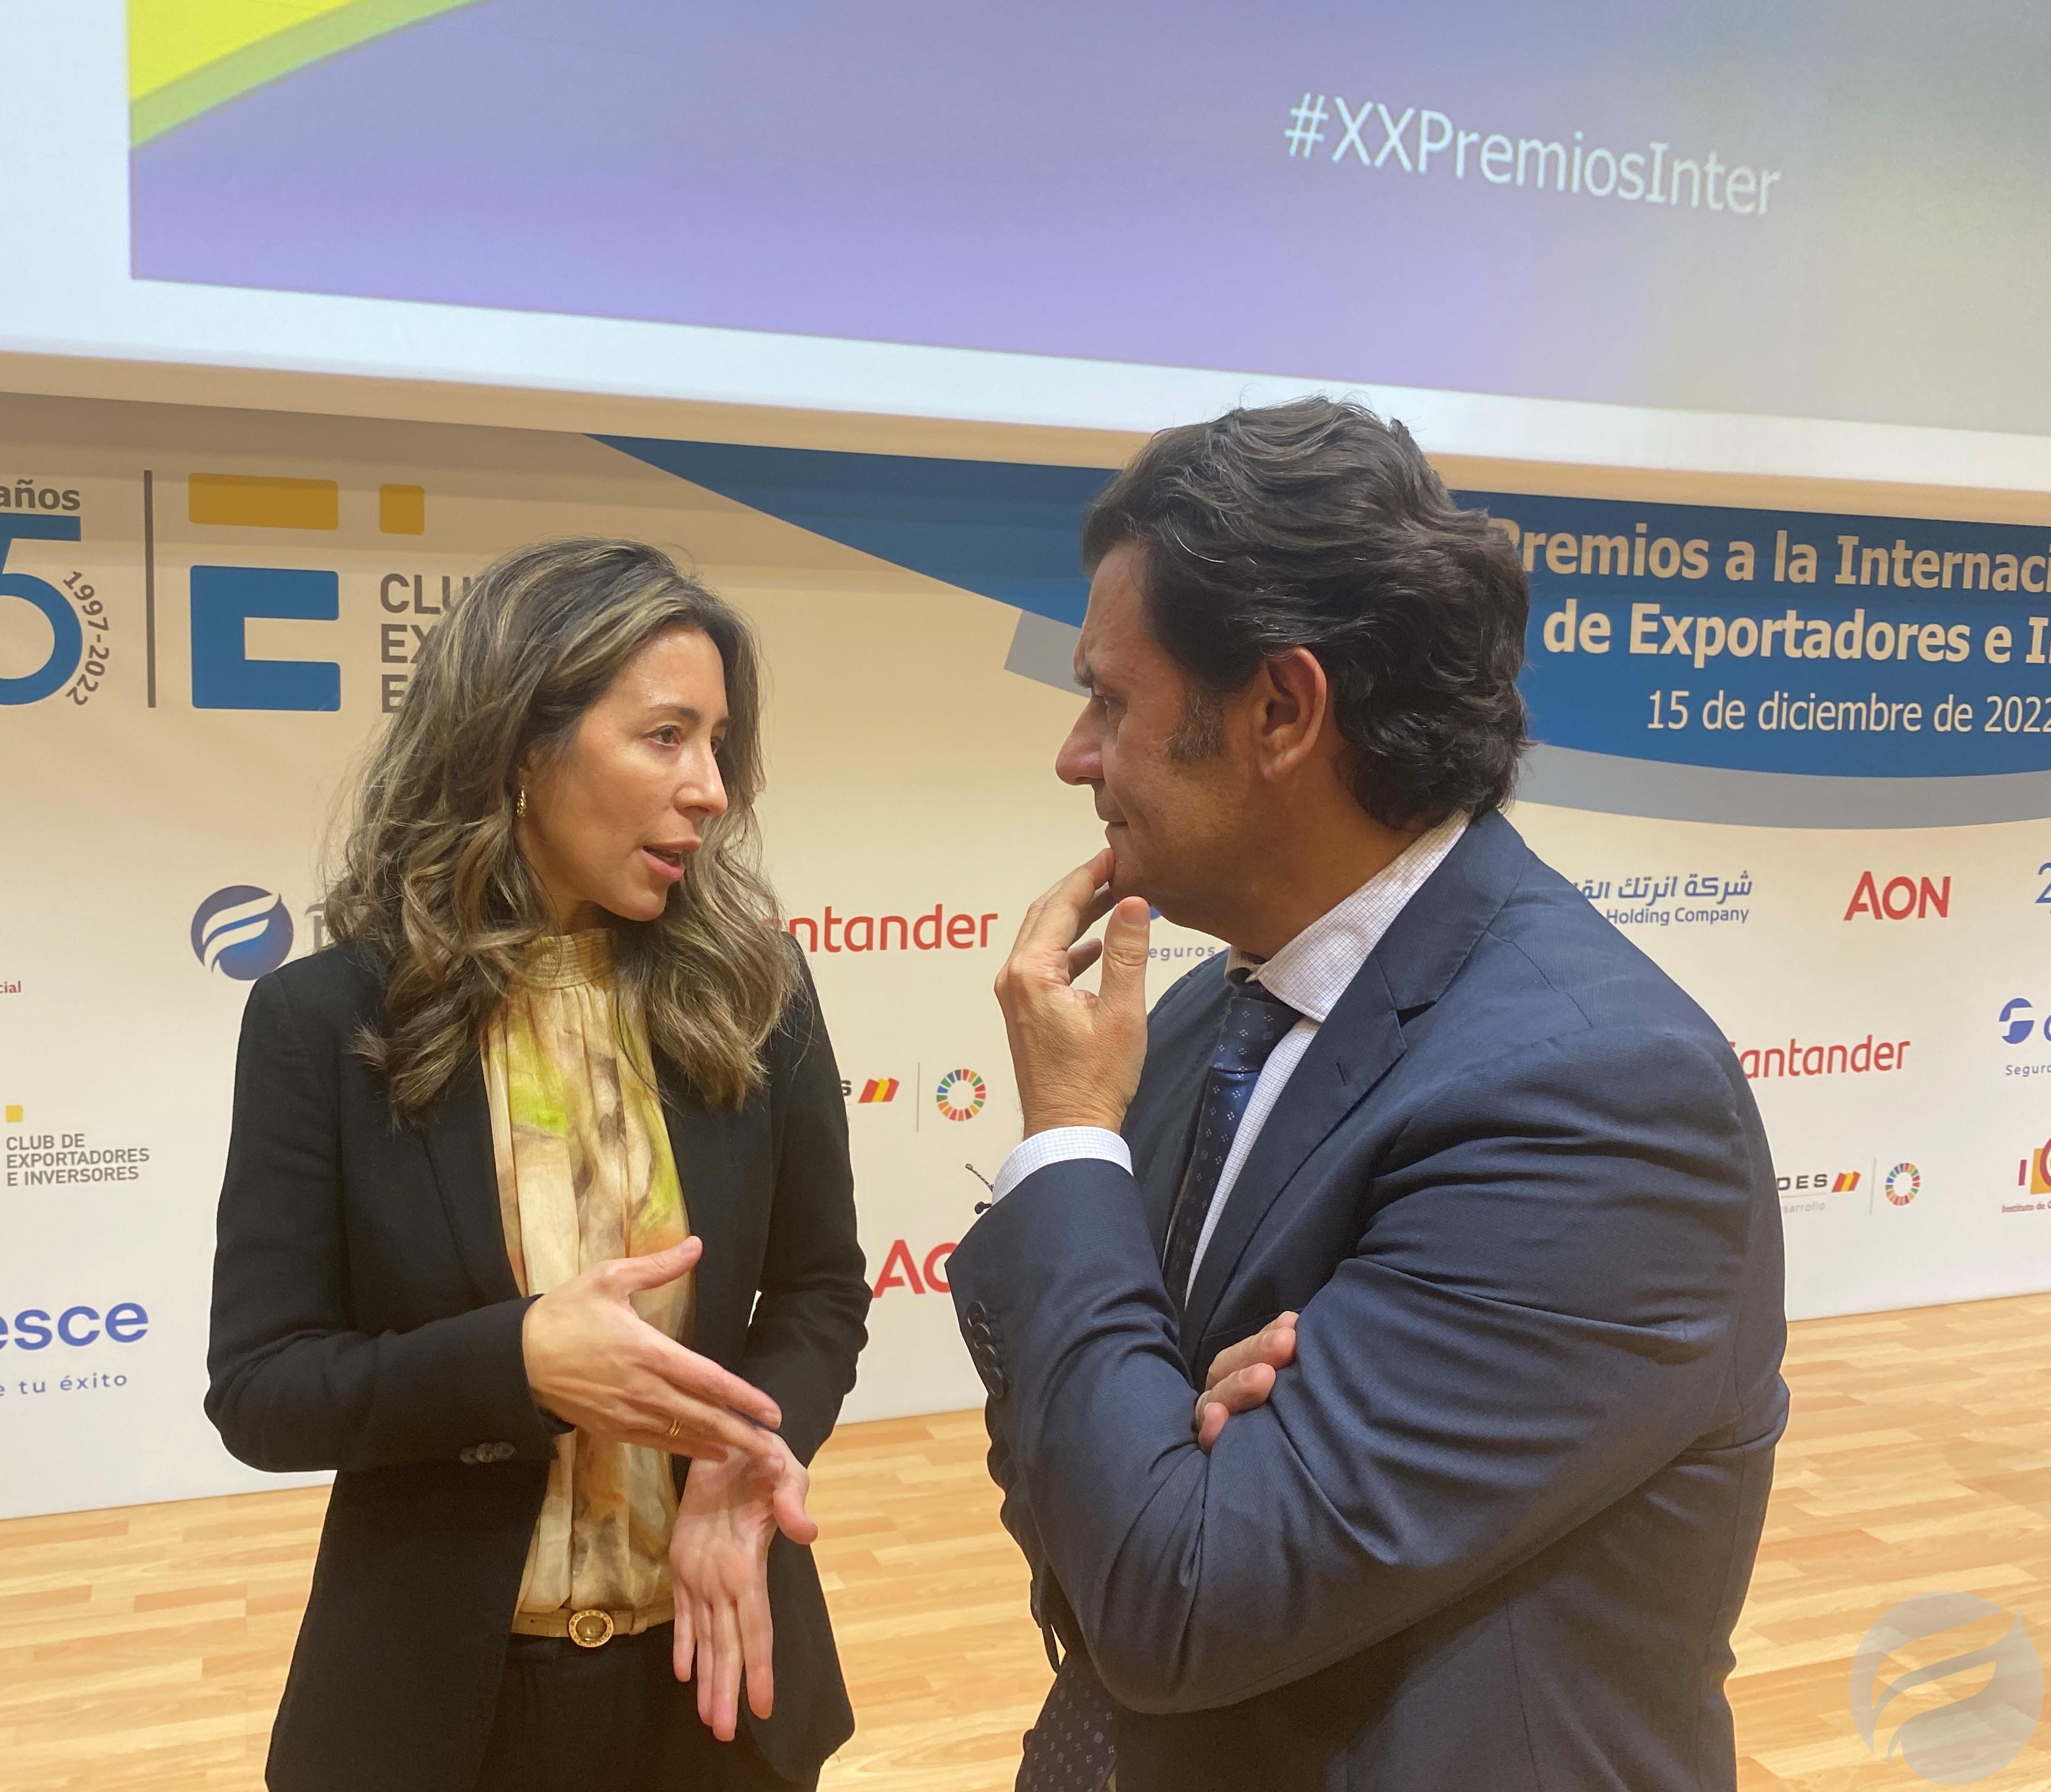 Víctor Alberola, General Director of FOCE, had the opportunity to share with Xiana Méndez, Secretary of State for Trade, the progress of FOCE´s different projects